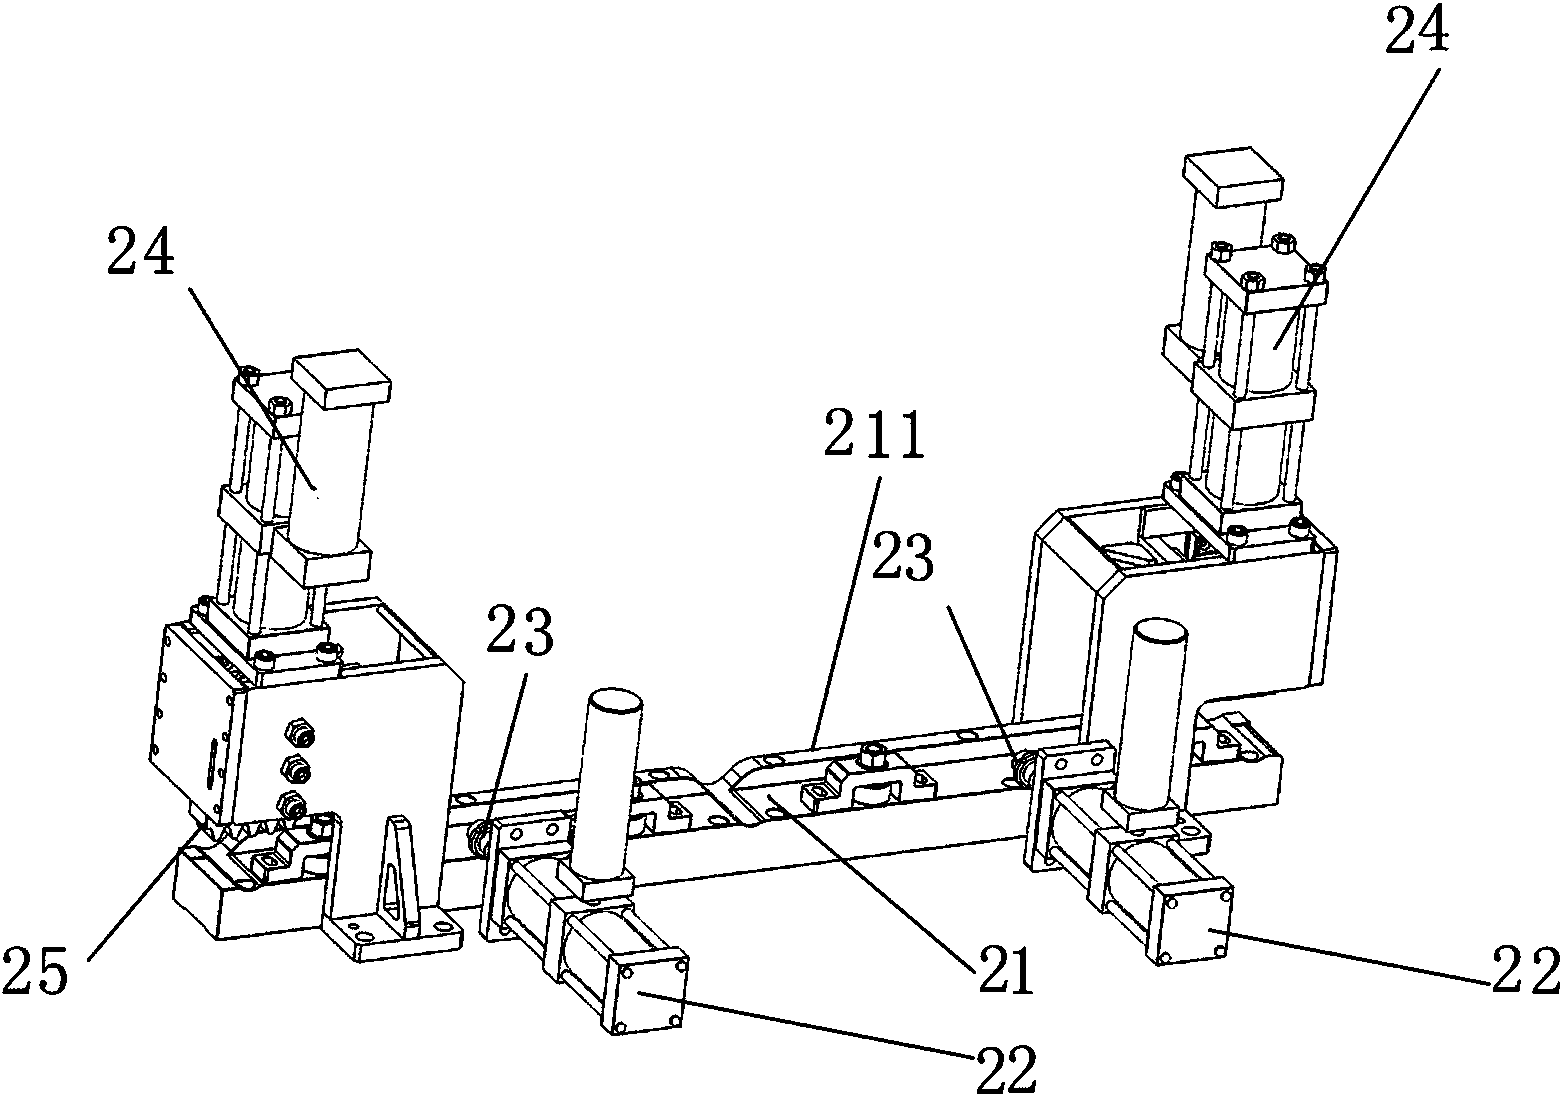 Drilling equipment used for drilling holes in two ends of rack